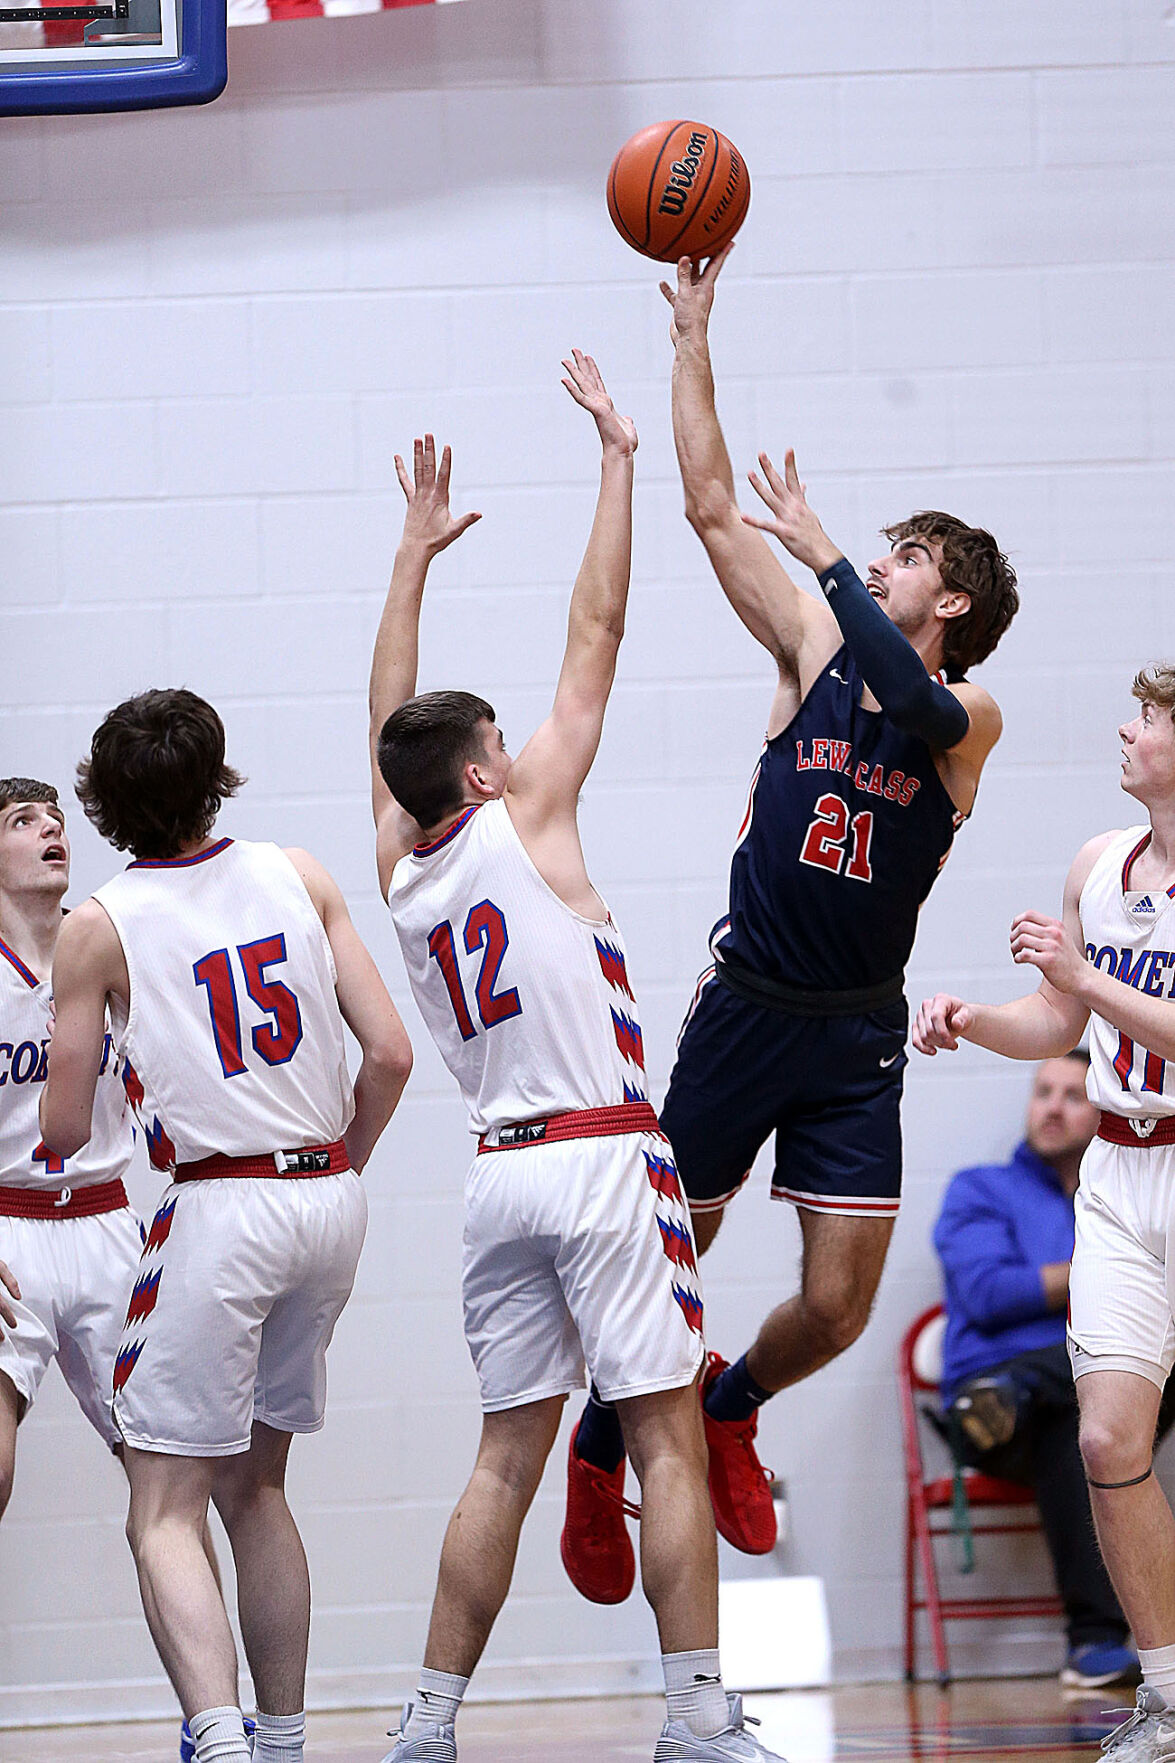 Lewis Cass Kings Defeat Caston in a Thrilling 48-43 Victory with Strong Performances